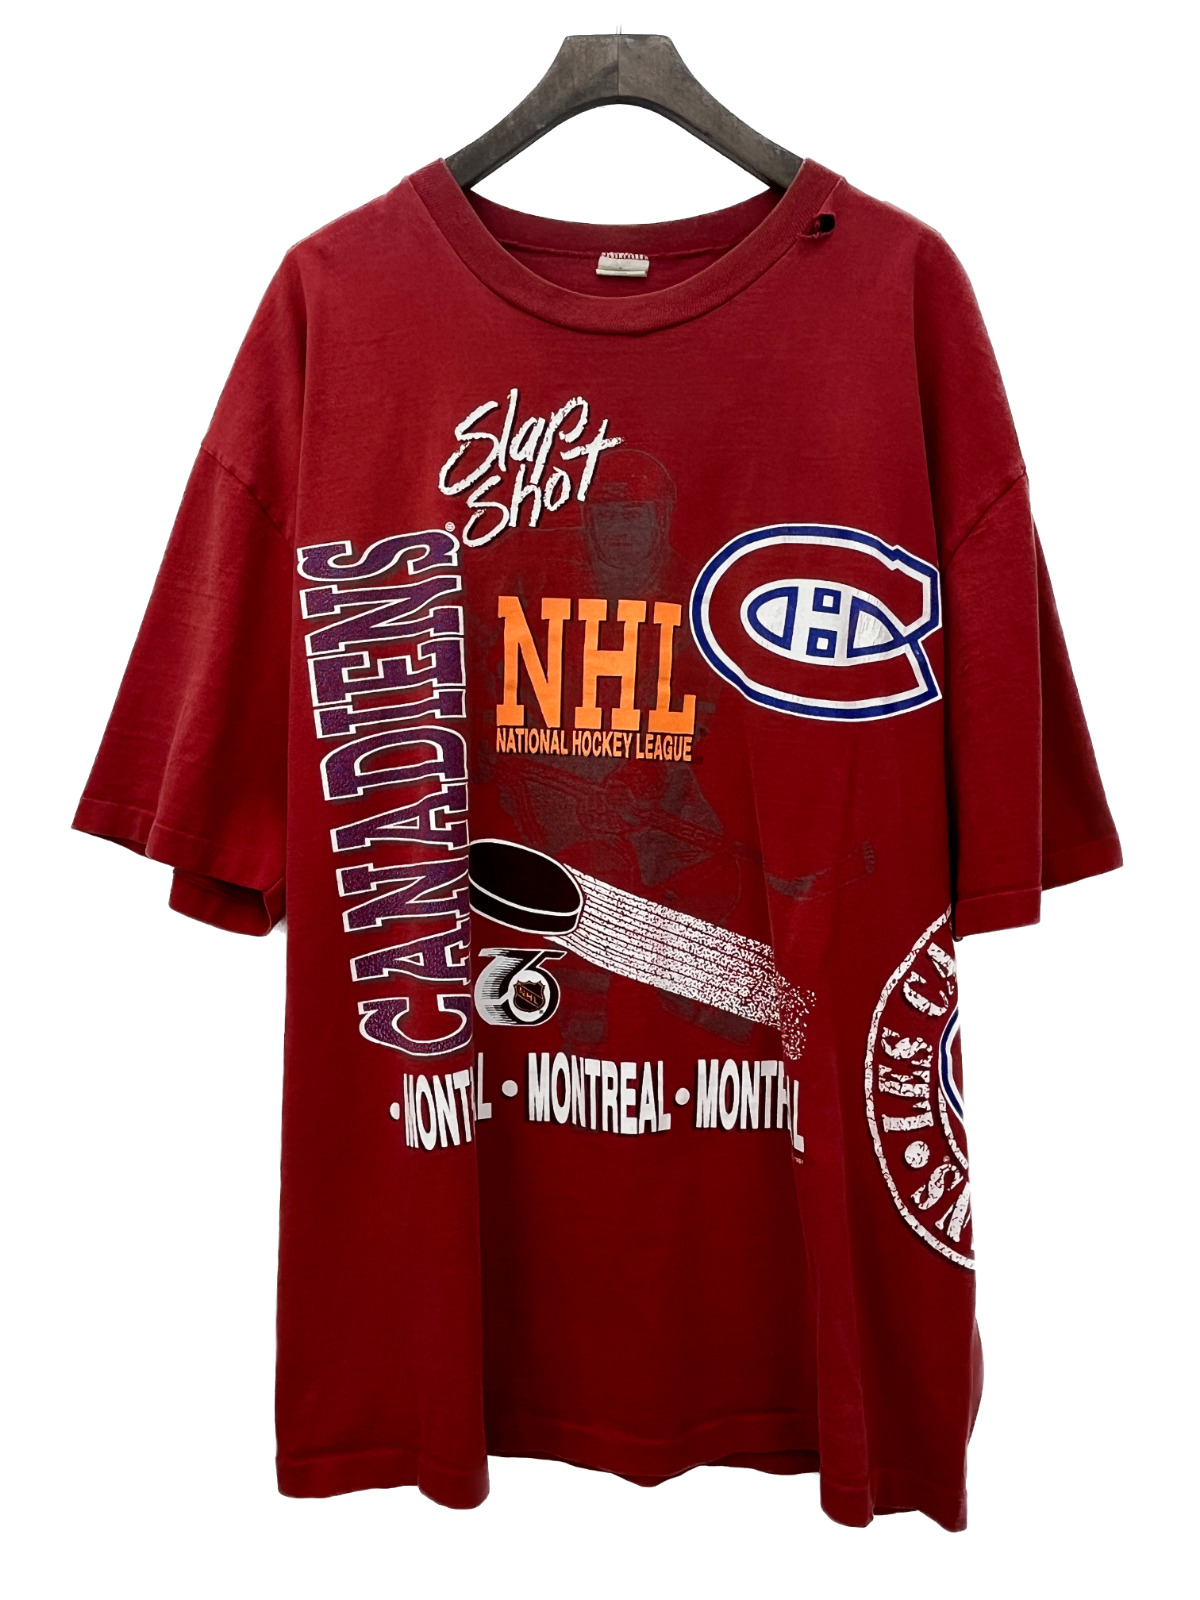 1991 Montreal Canadiens Vintage Hockey T-Shirt | AOP | Size XL | Red | NHL